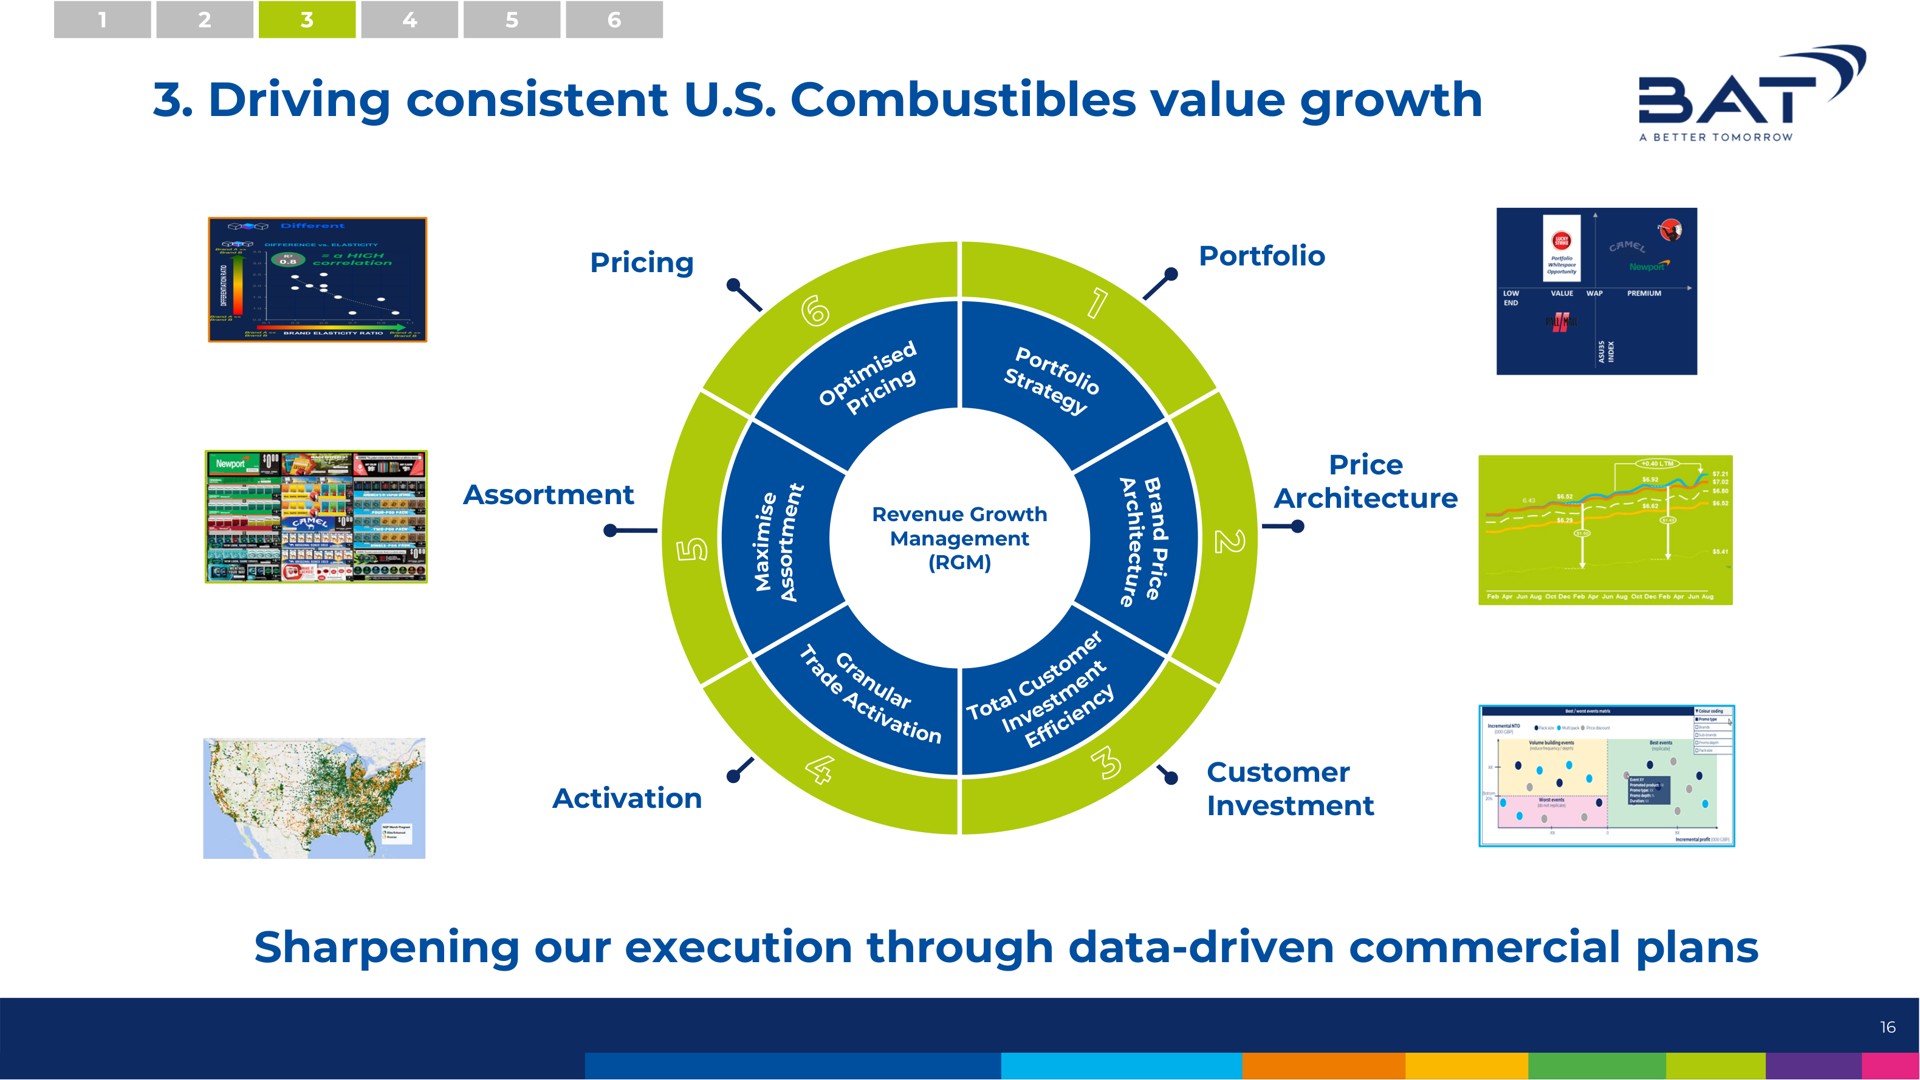 driving consistent combustibles value growth sat a sharpening our execution through data driven commercial plans | BAT